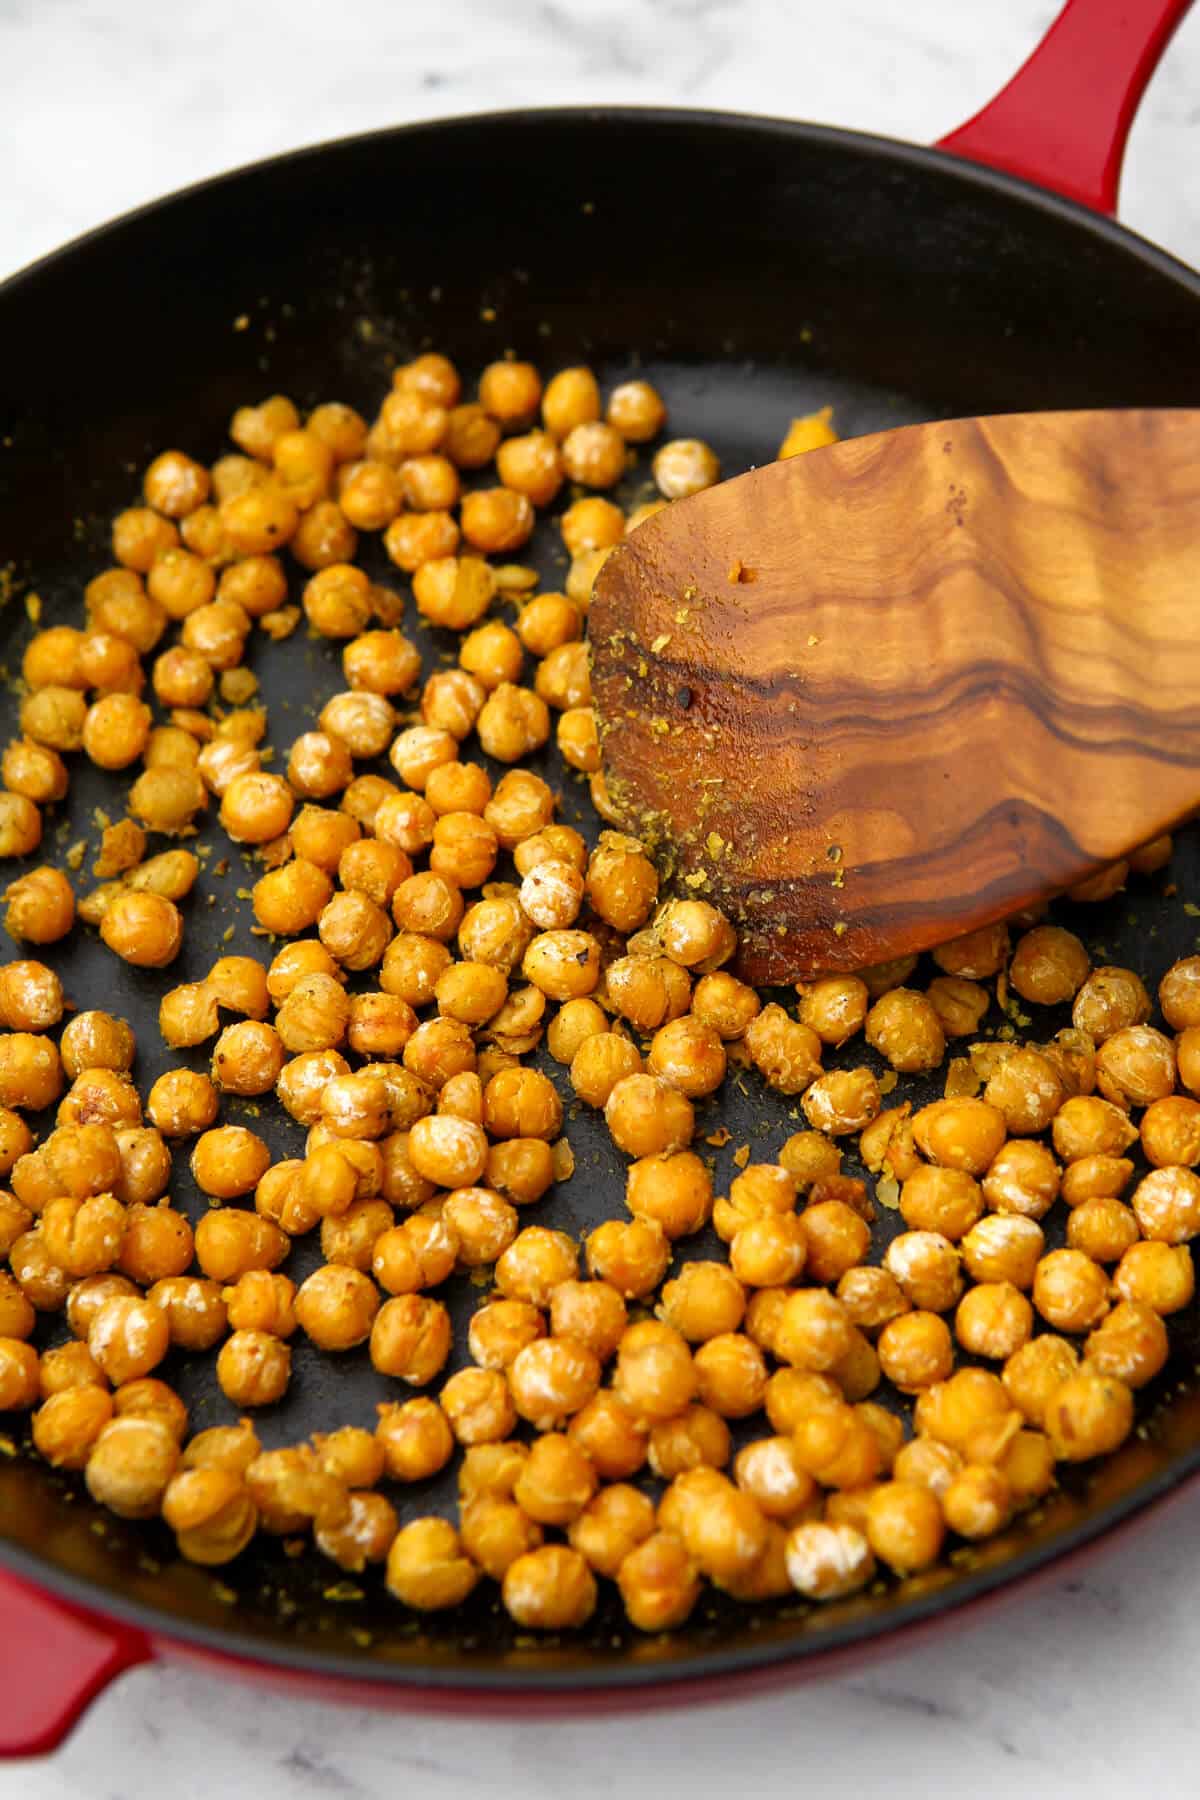 Seasoned sauteed chickpeas in an iron skillet after cooking.